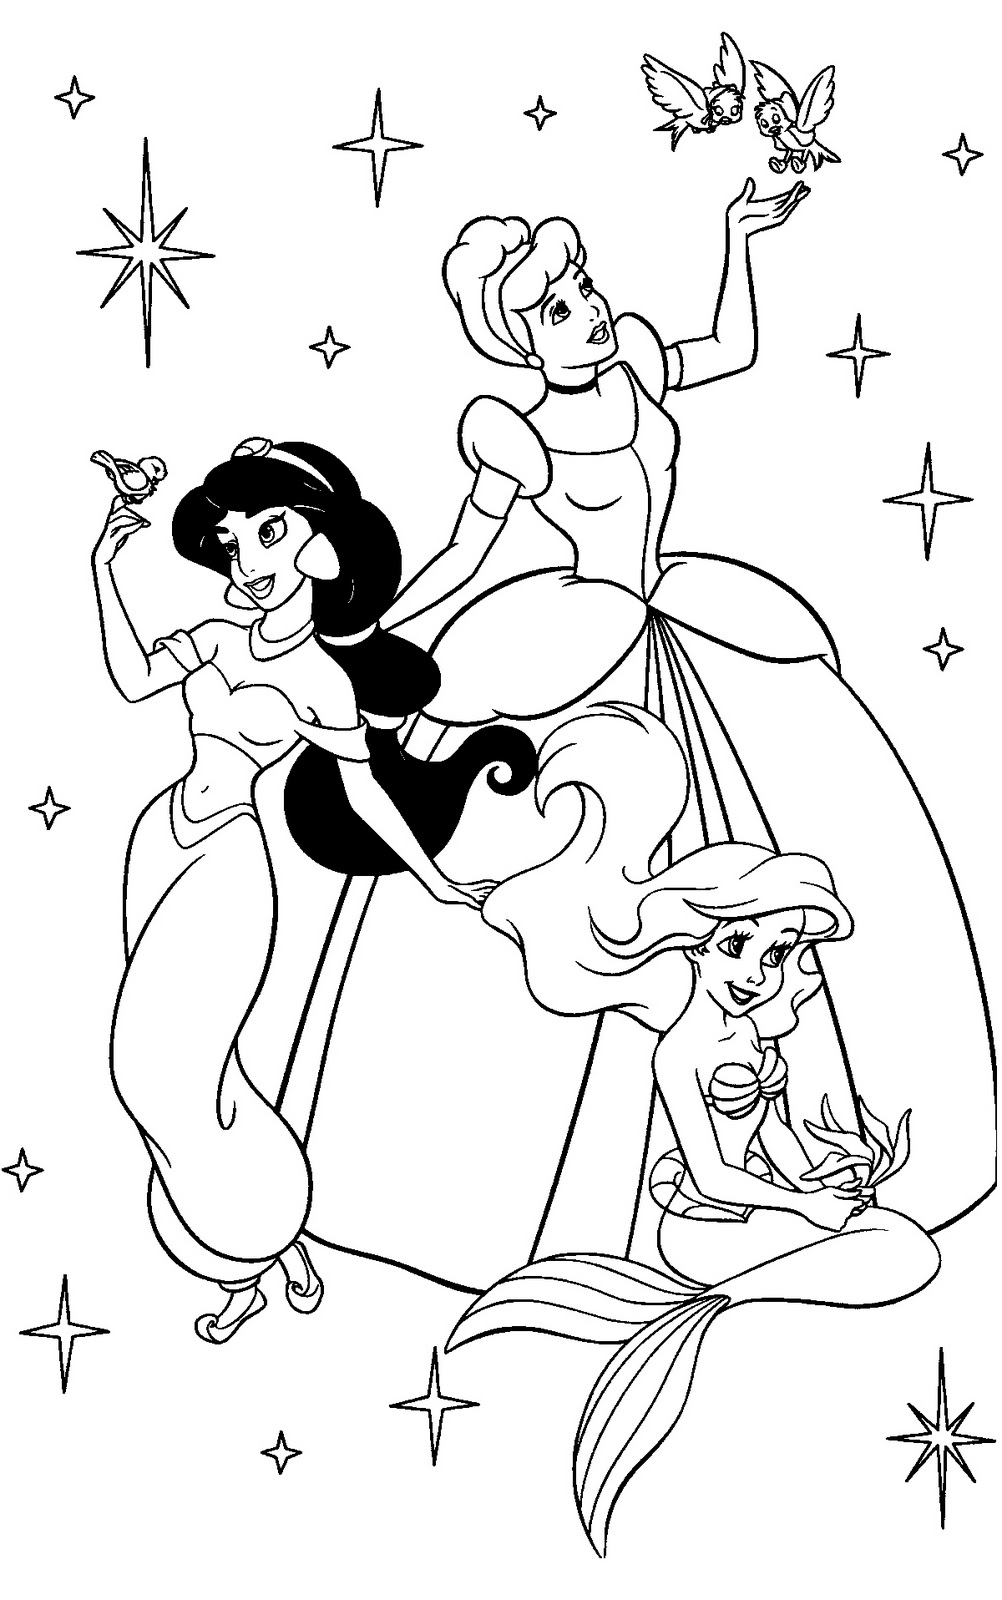 Disney Princesses - Best Coloring Pages - Free Coloring ...